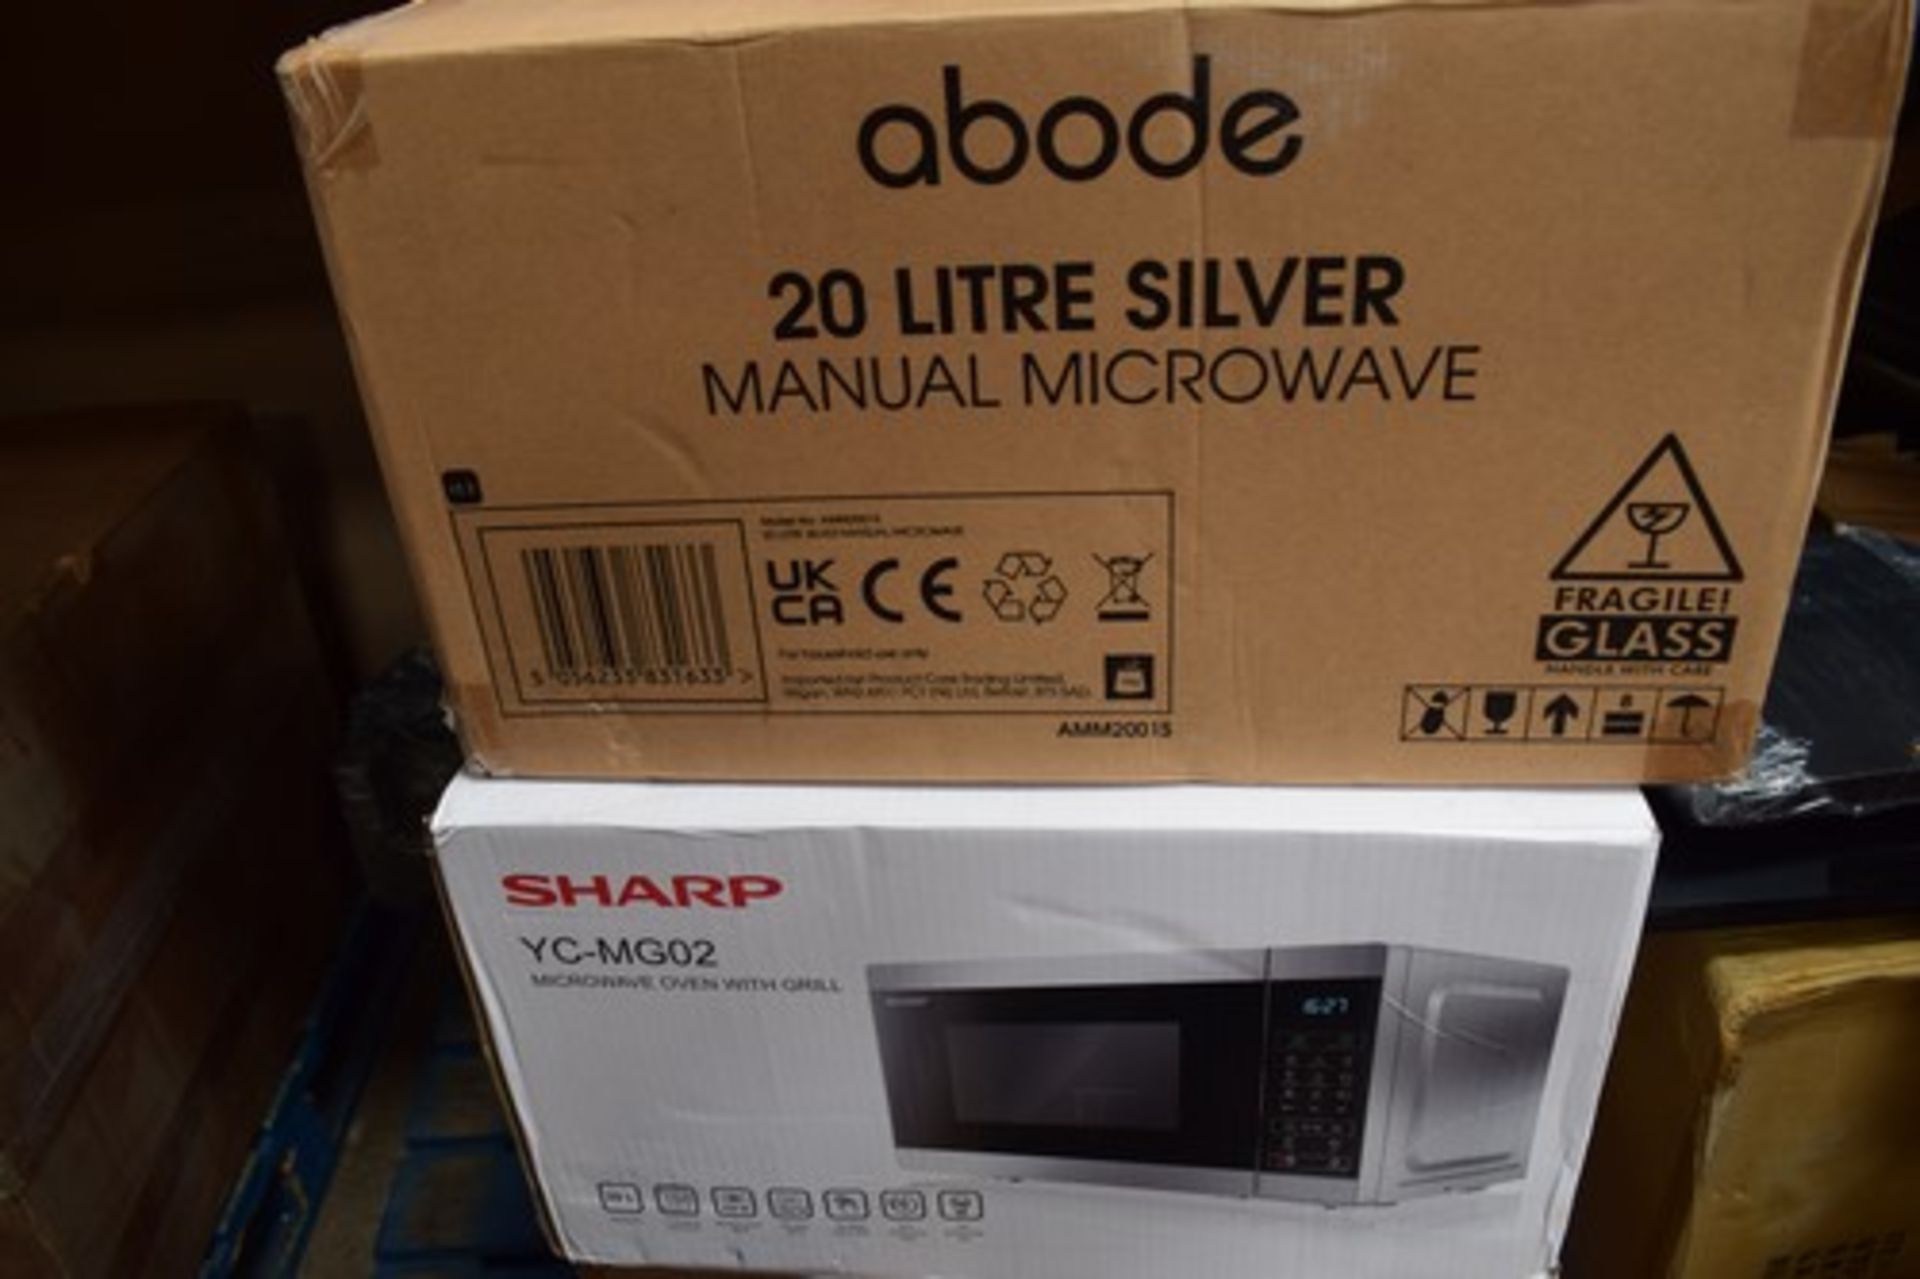 1 x Sharp microwave oven with grill, Model YC-MG02 and 1 x Abode 20 litre silver microwave - New